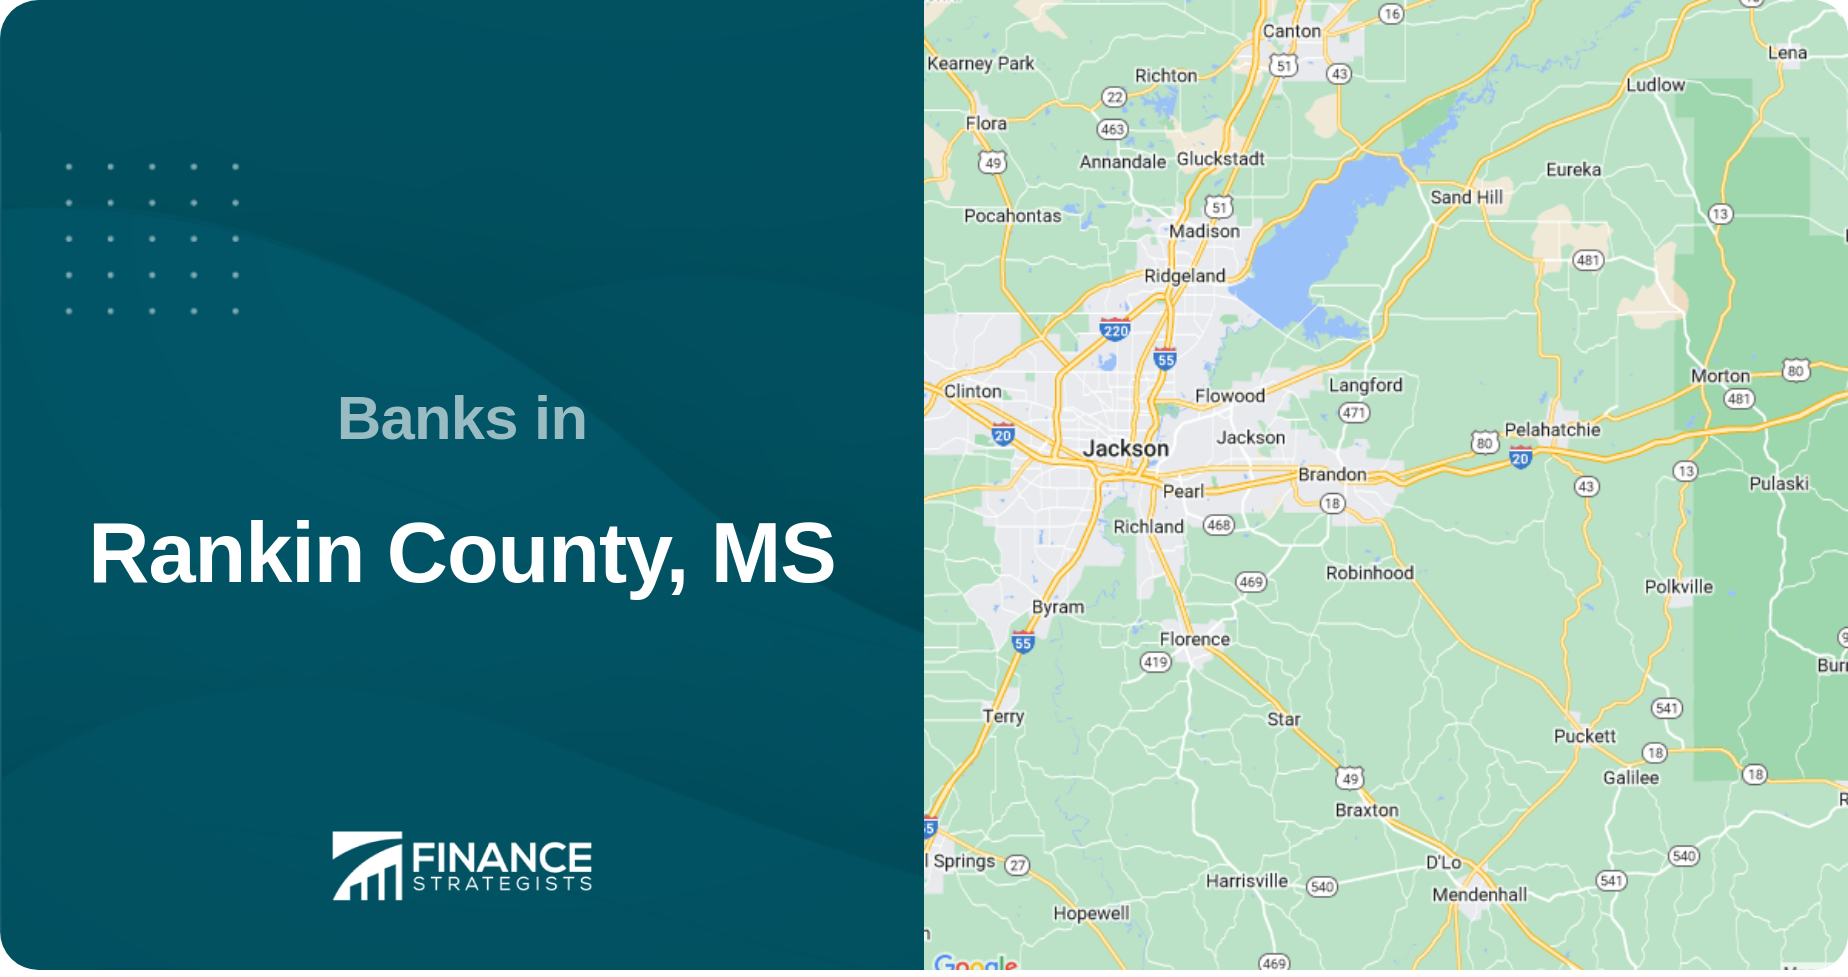 Banks in Rankin County, MS